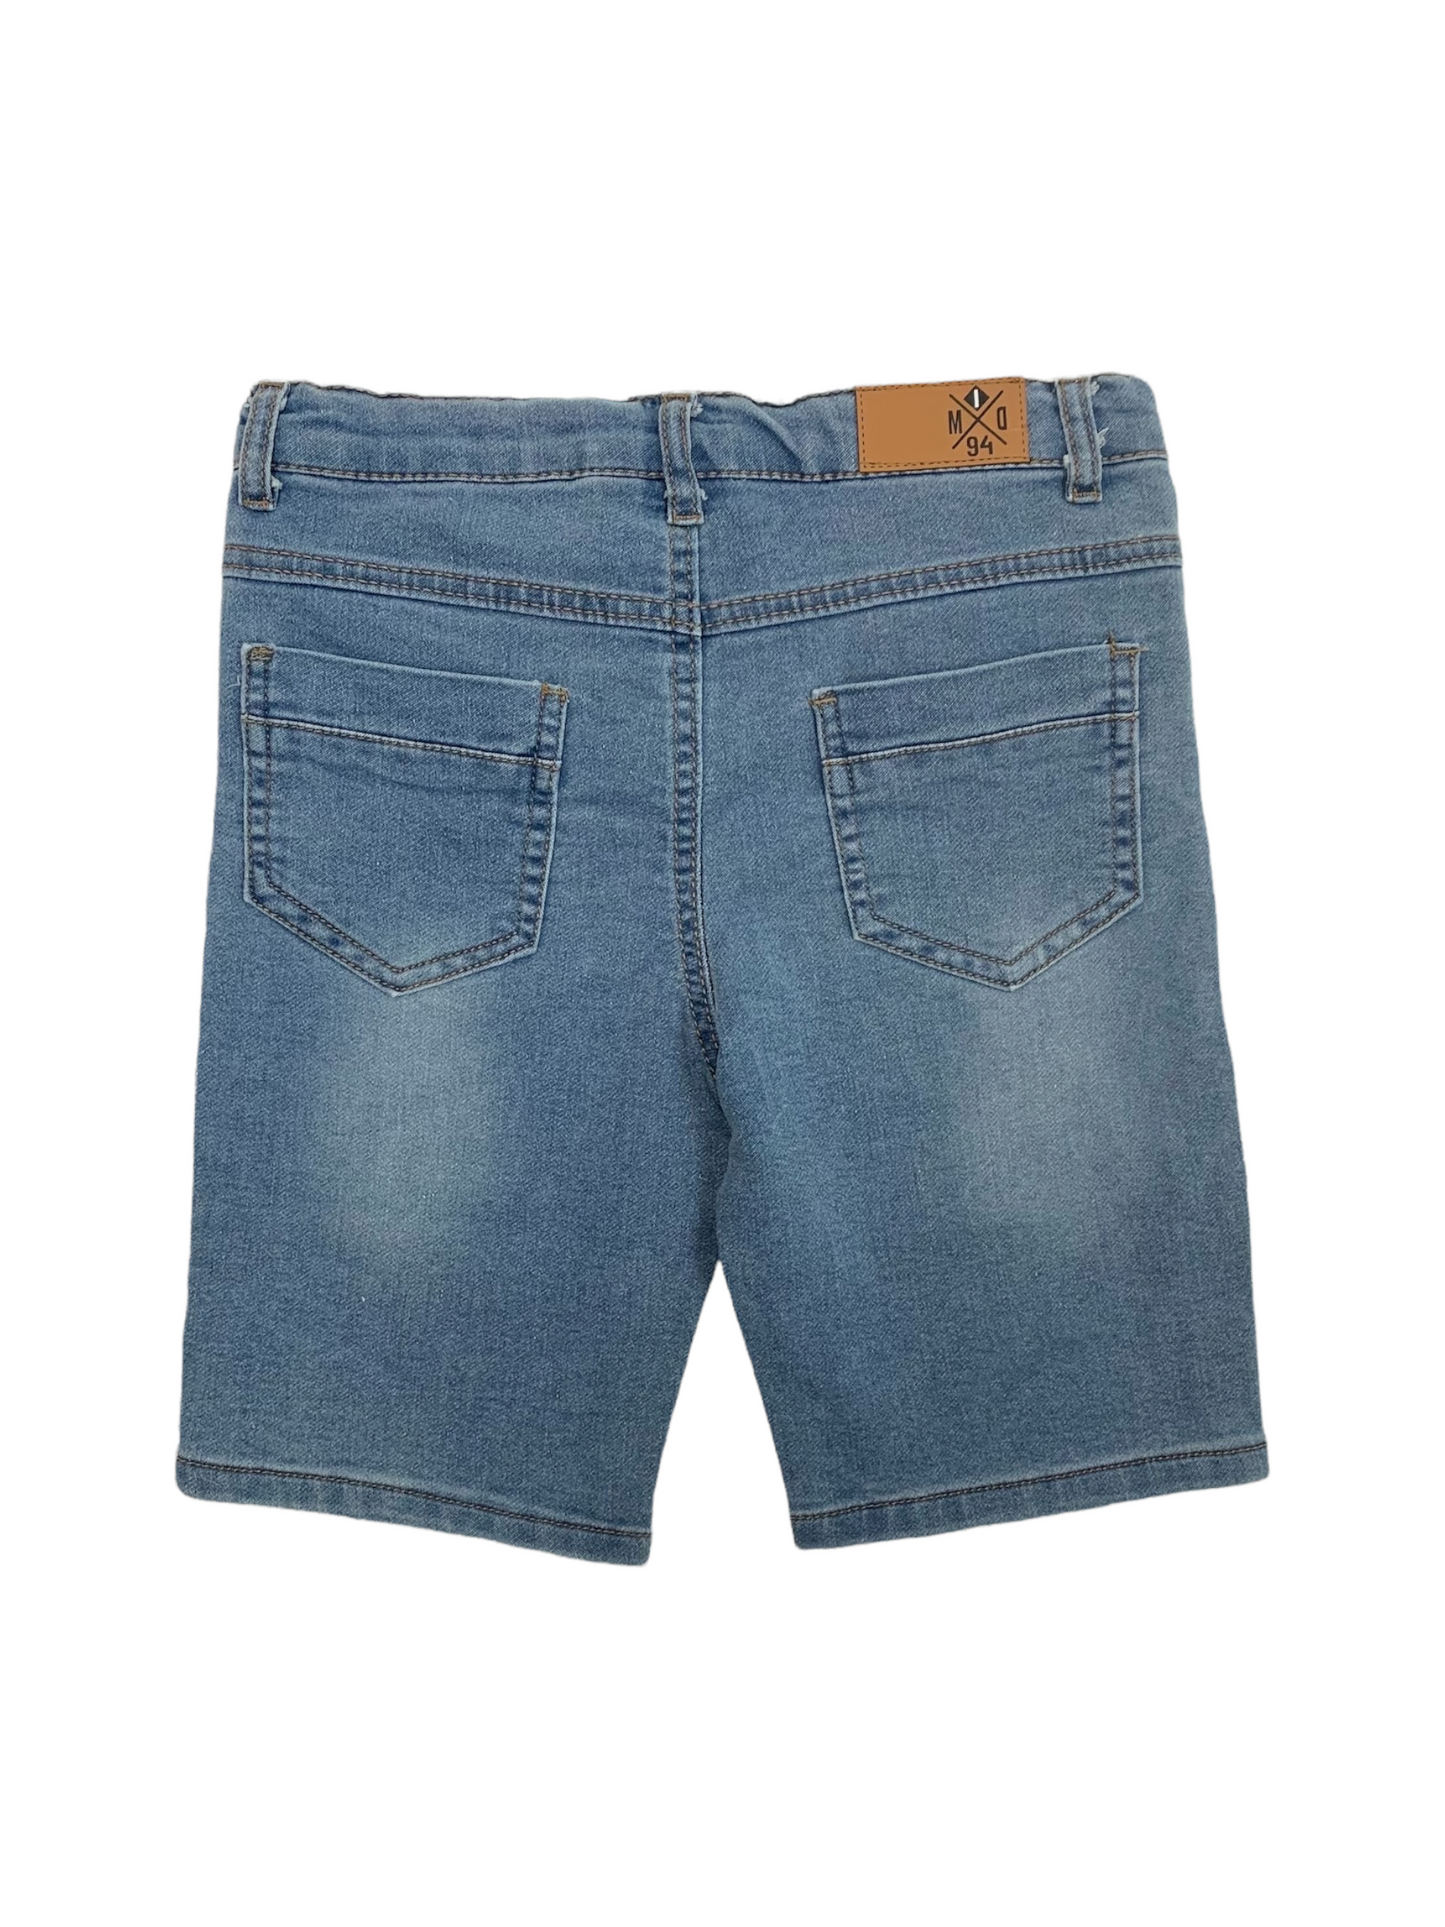 Pale blue MID Bermuda shorts for boys 7 to 14 years old